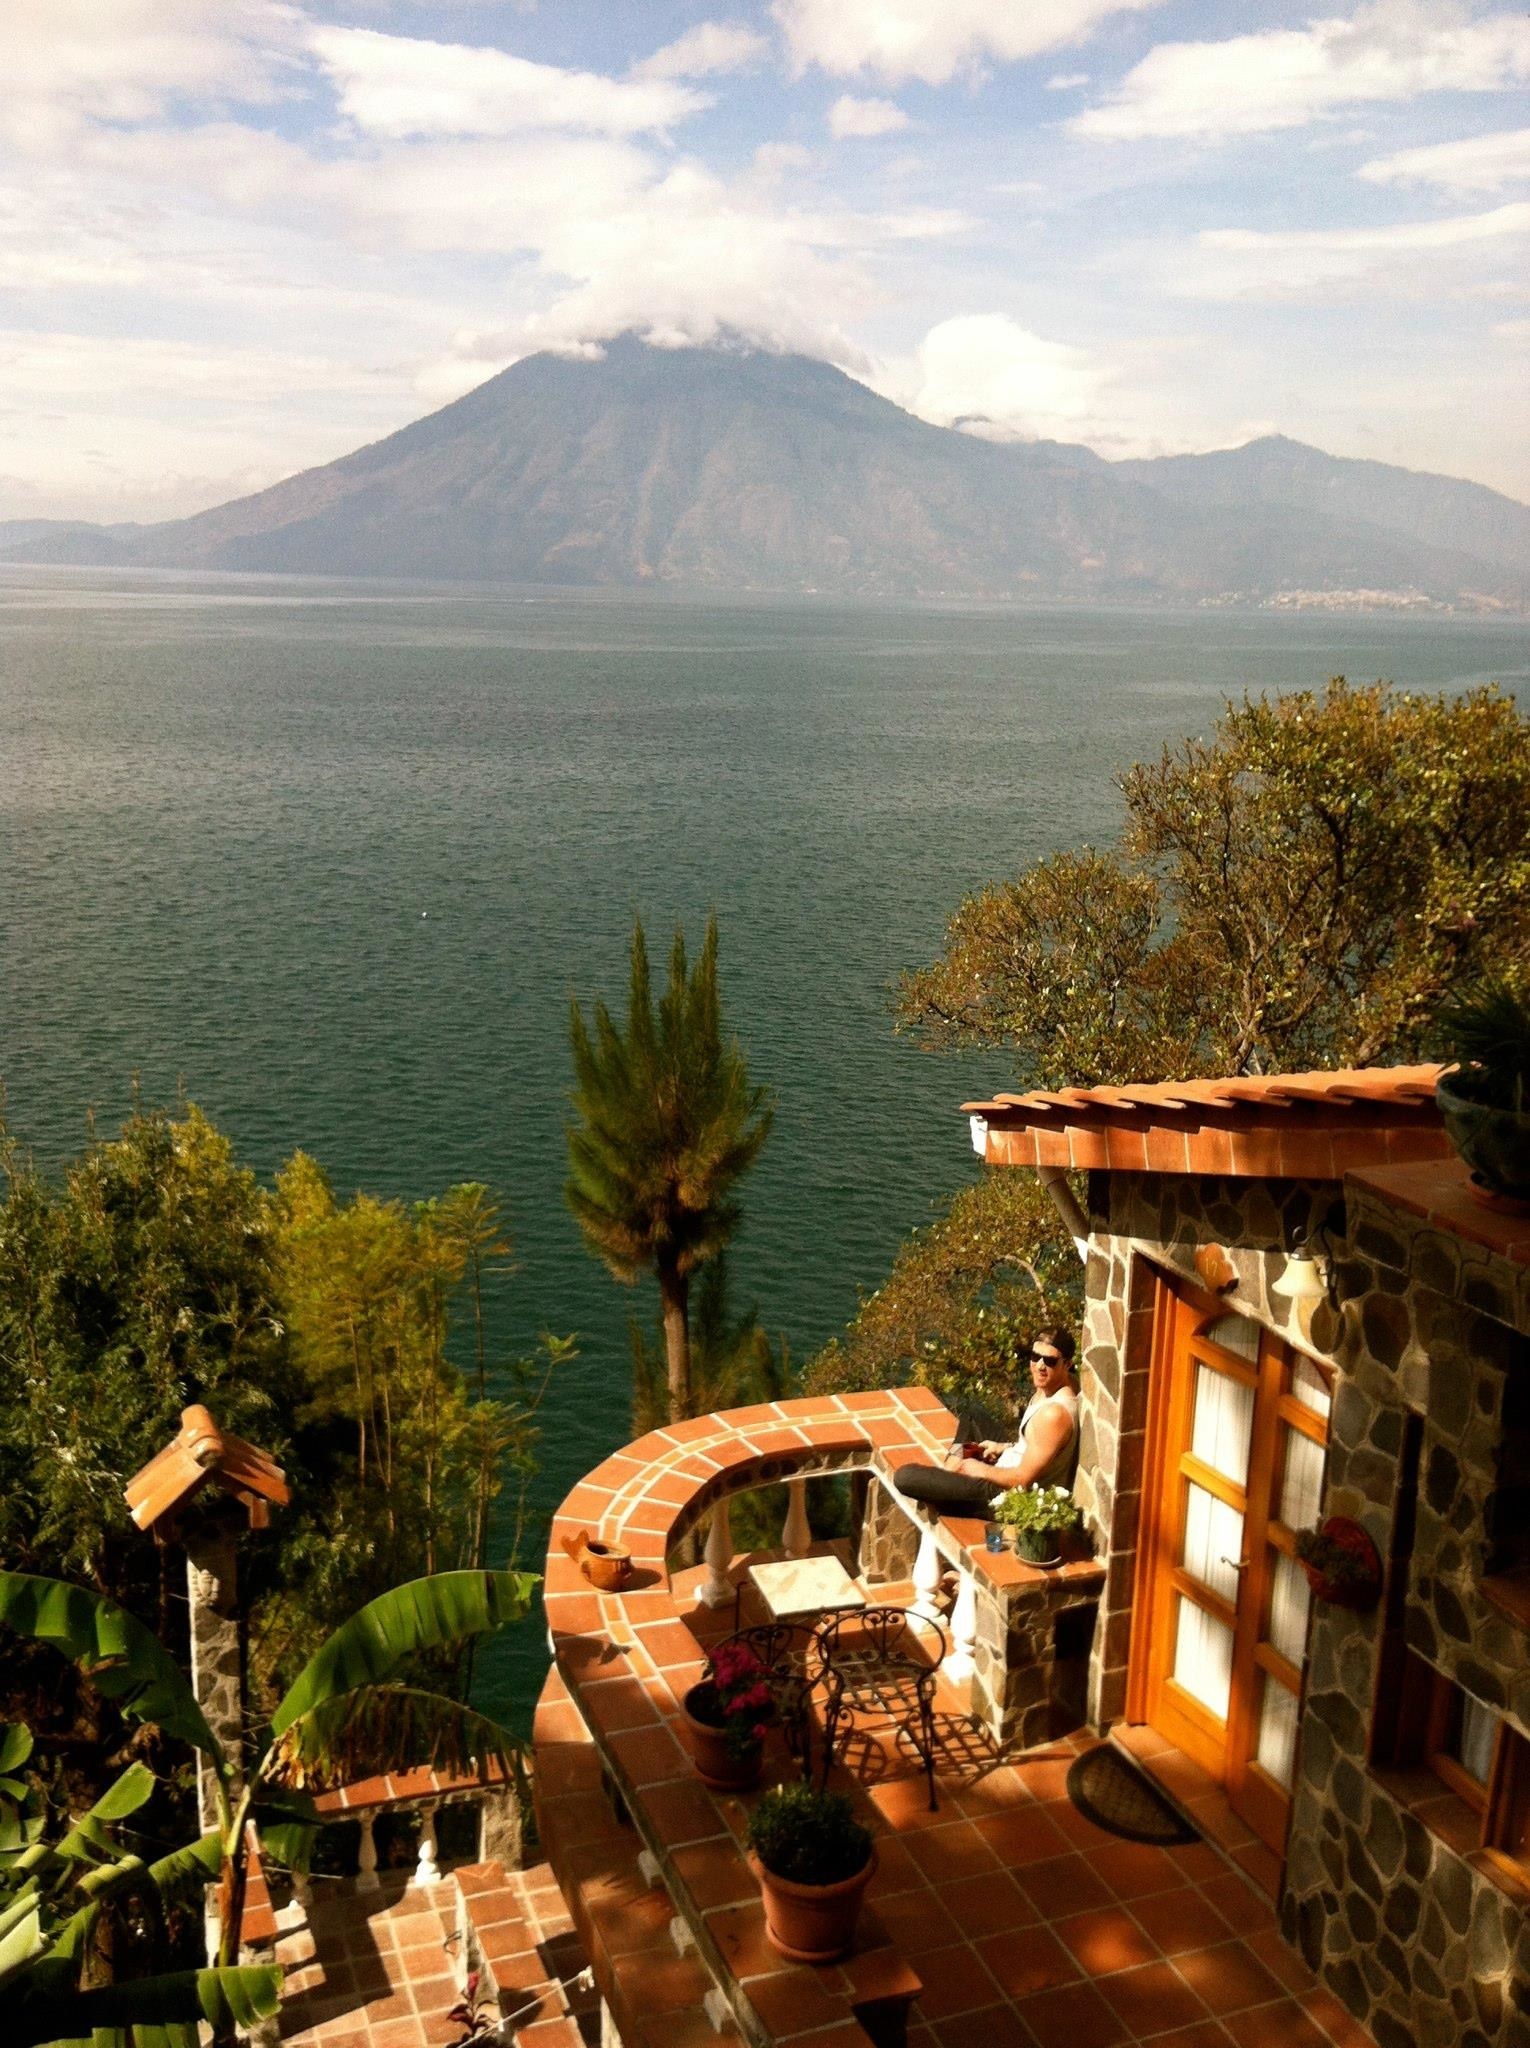 Person on patio overlooking water and volcano